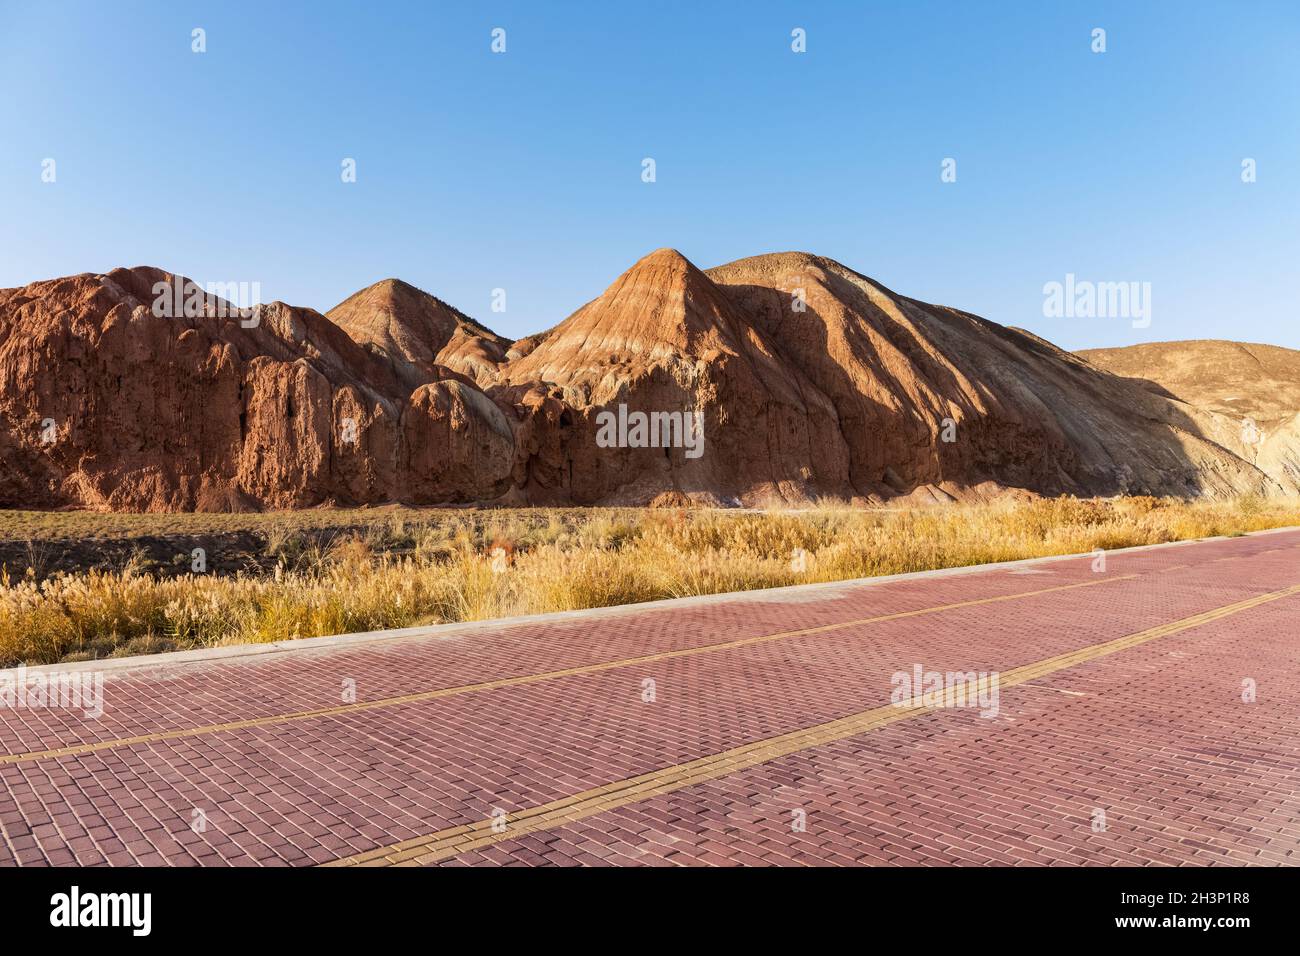 Brick road with beautiful hilly landscape at dusk Stock Photo